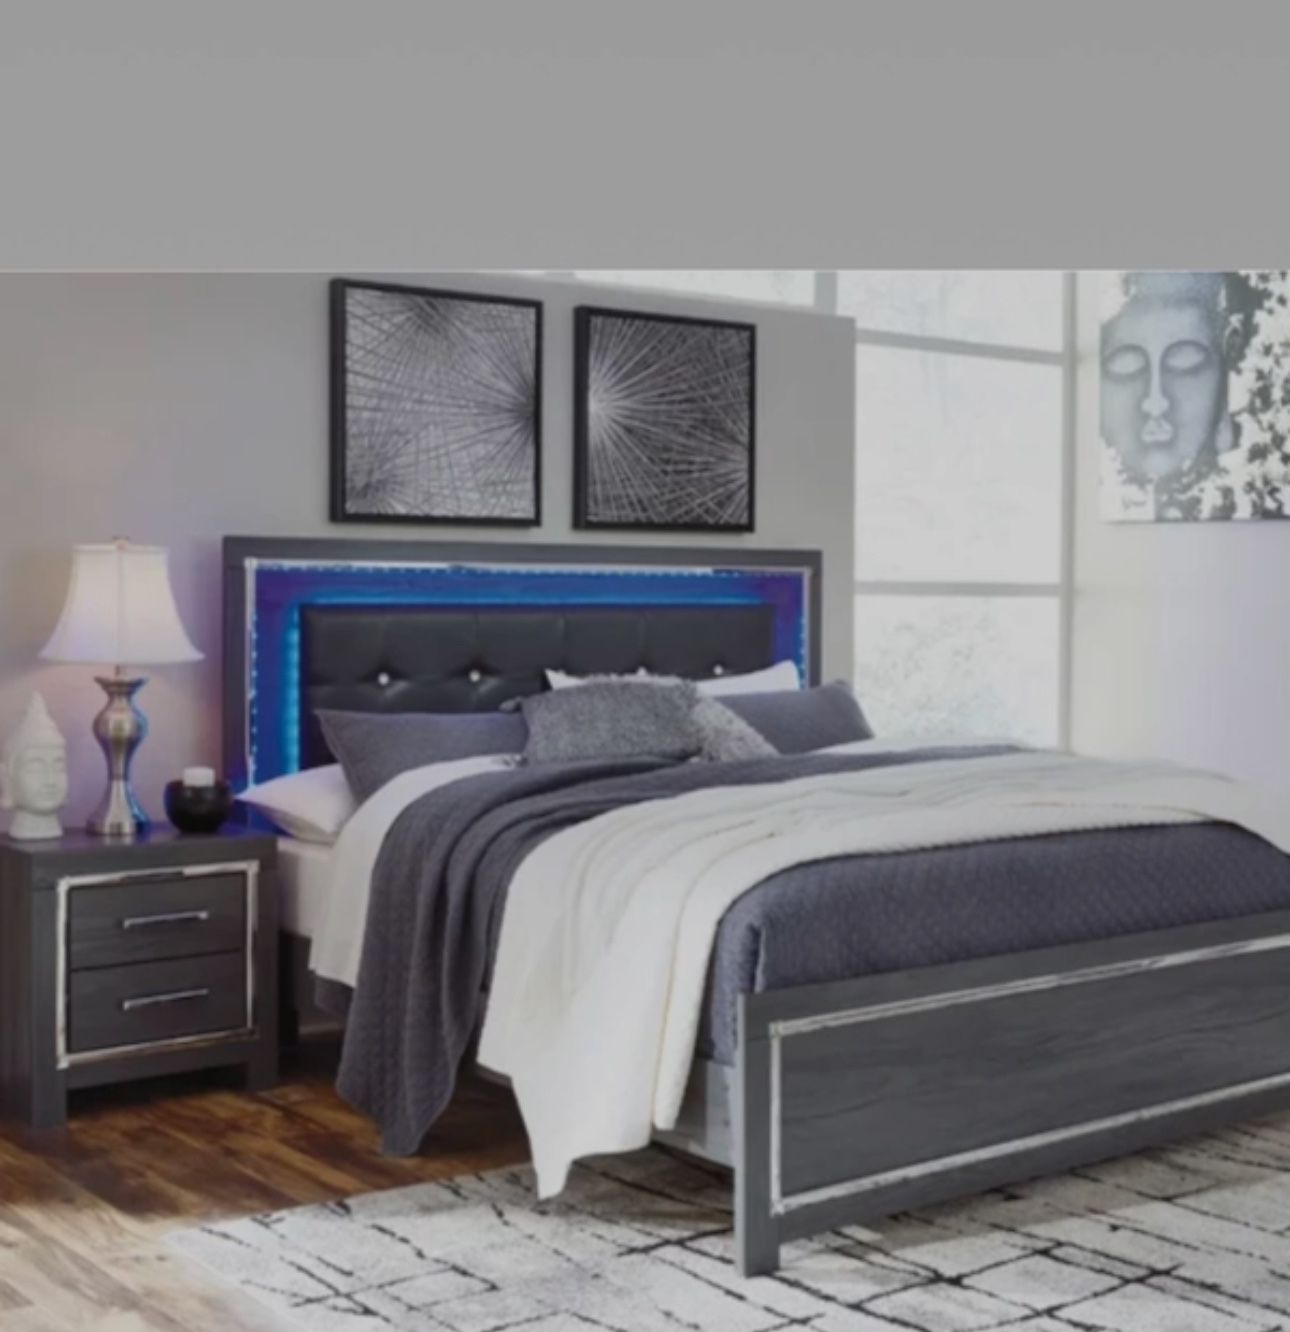 Led Bed frame With Matching Dresser. 